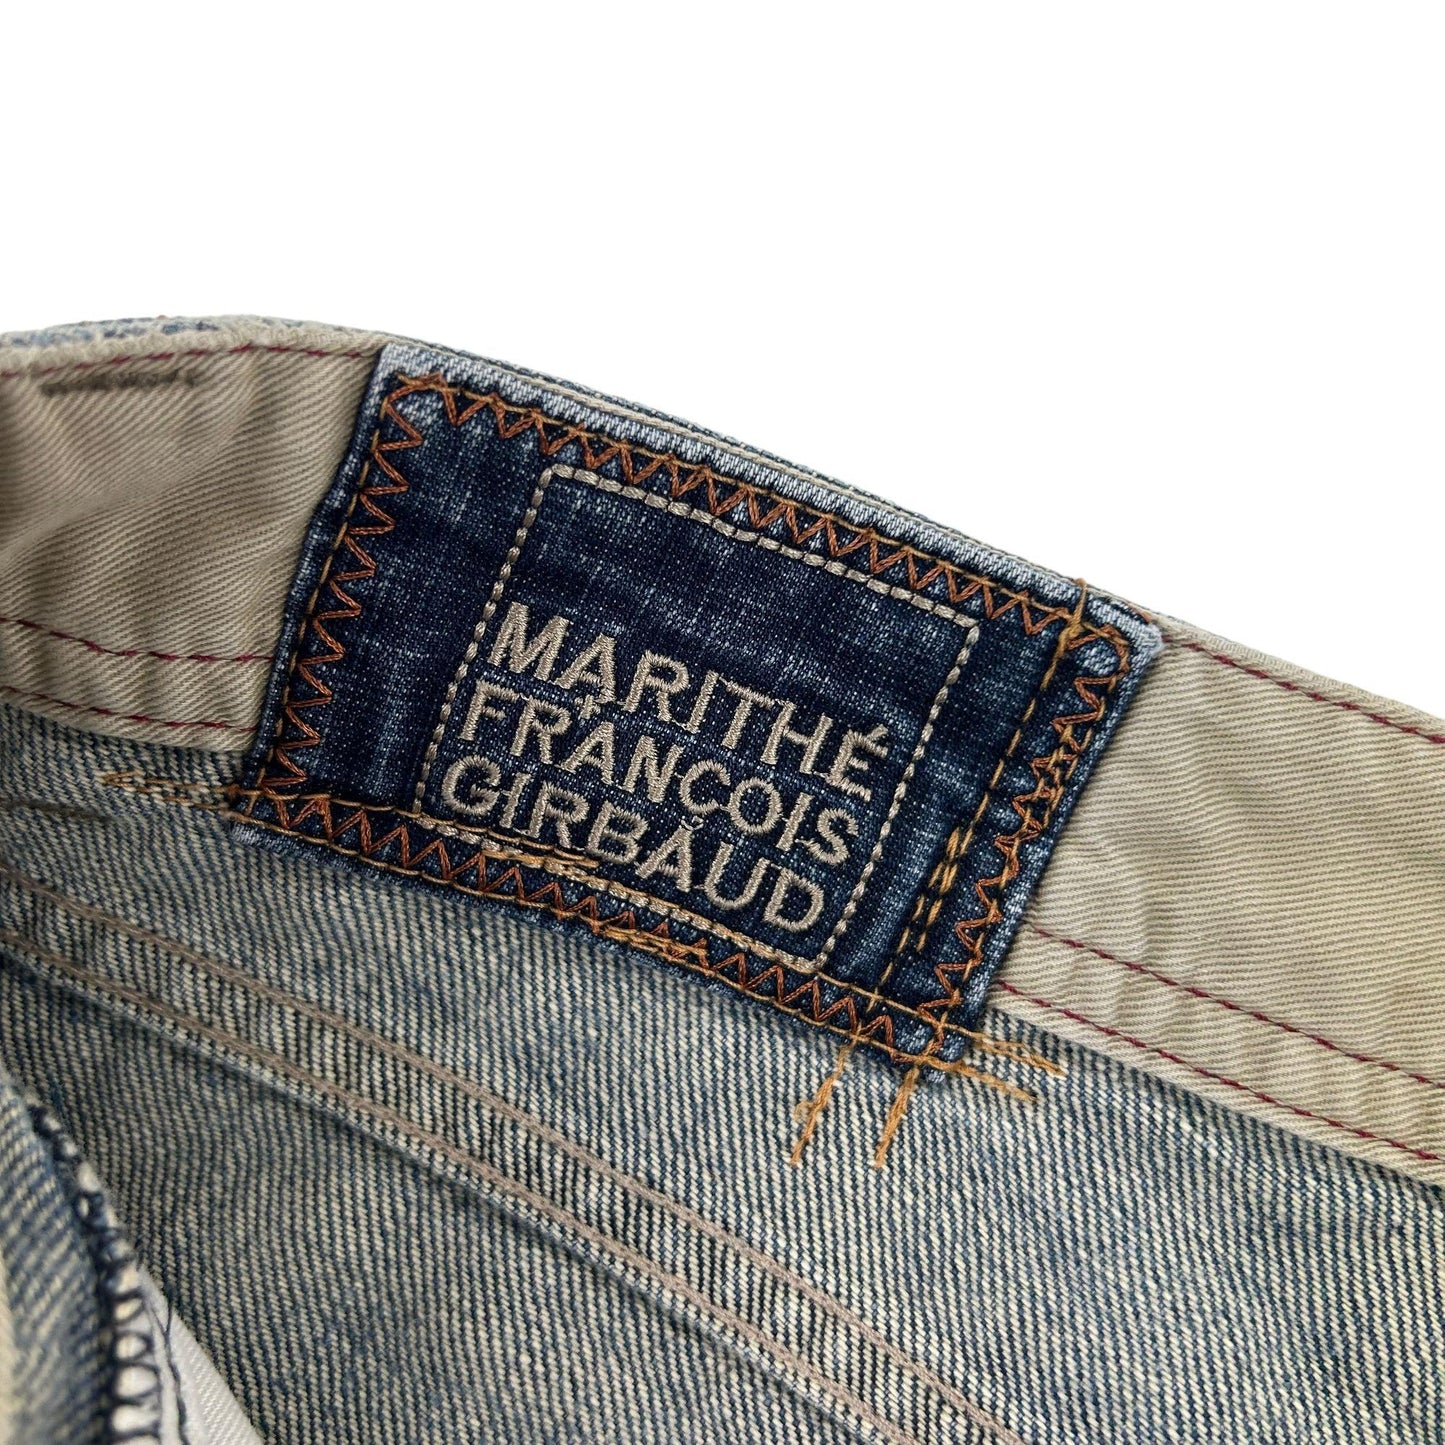 Vintage Marithe + Francois Girbaud Distressed Denim Jeans Size W31 - Known Source